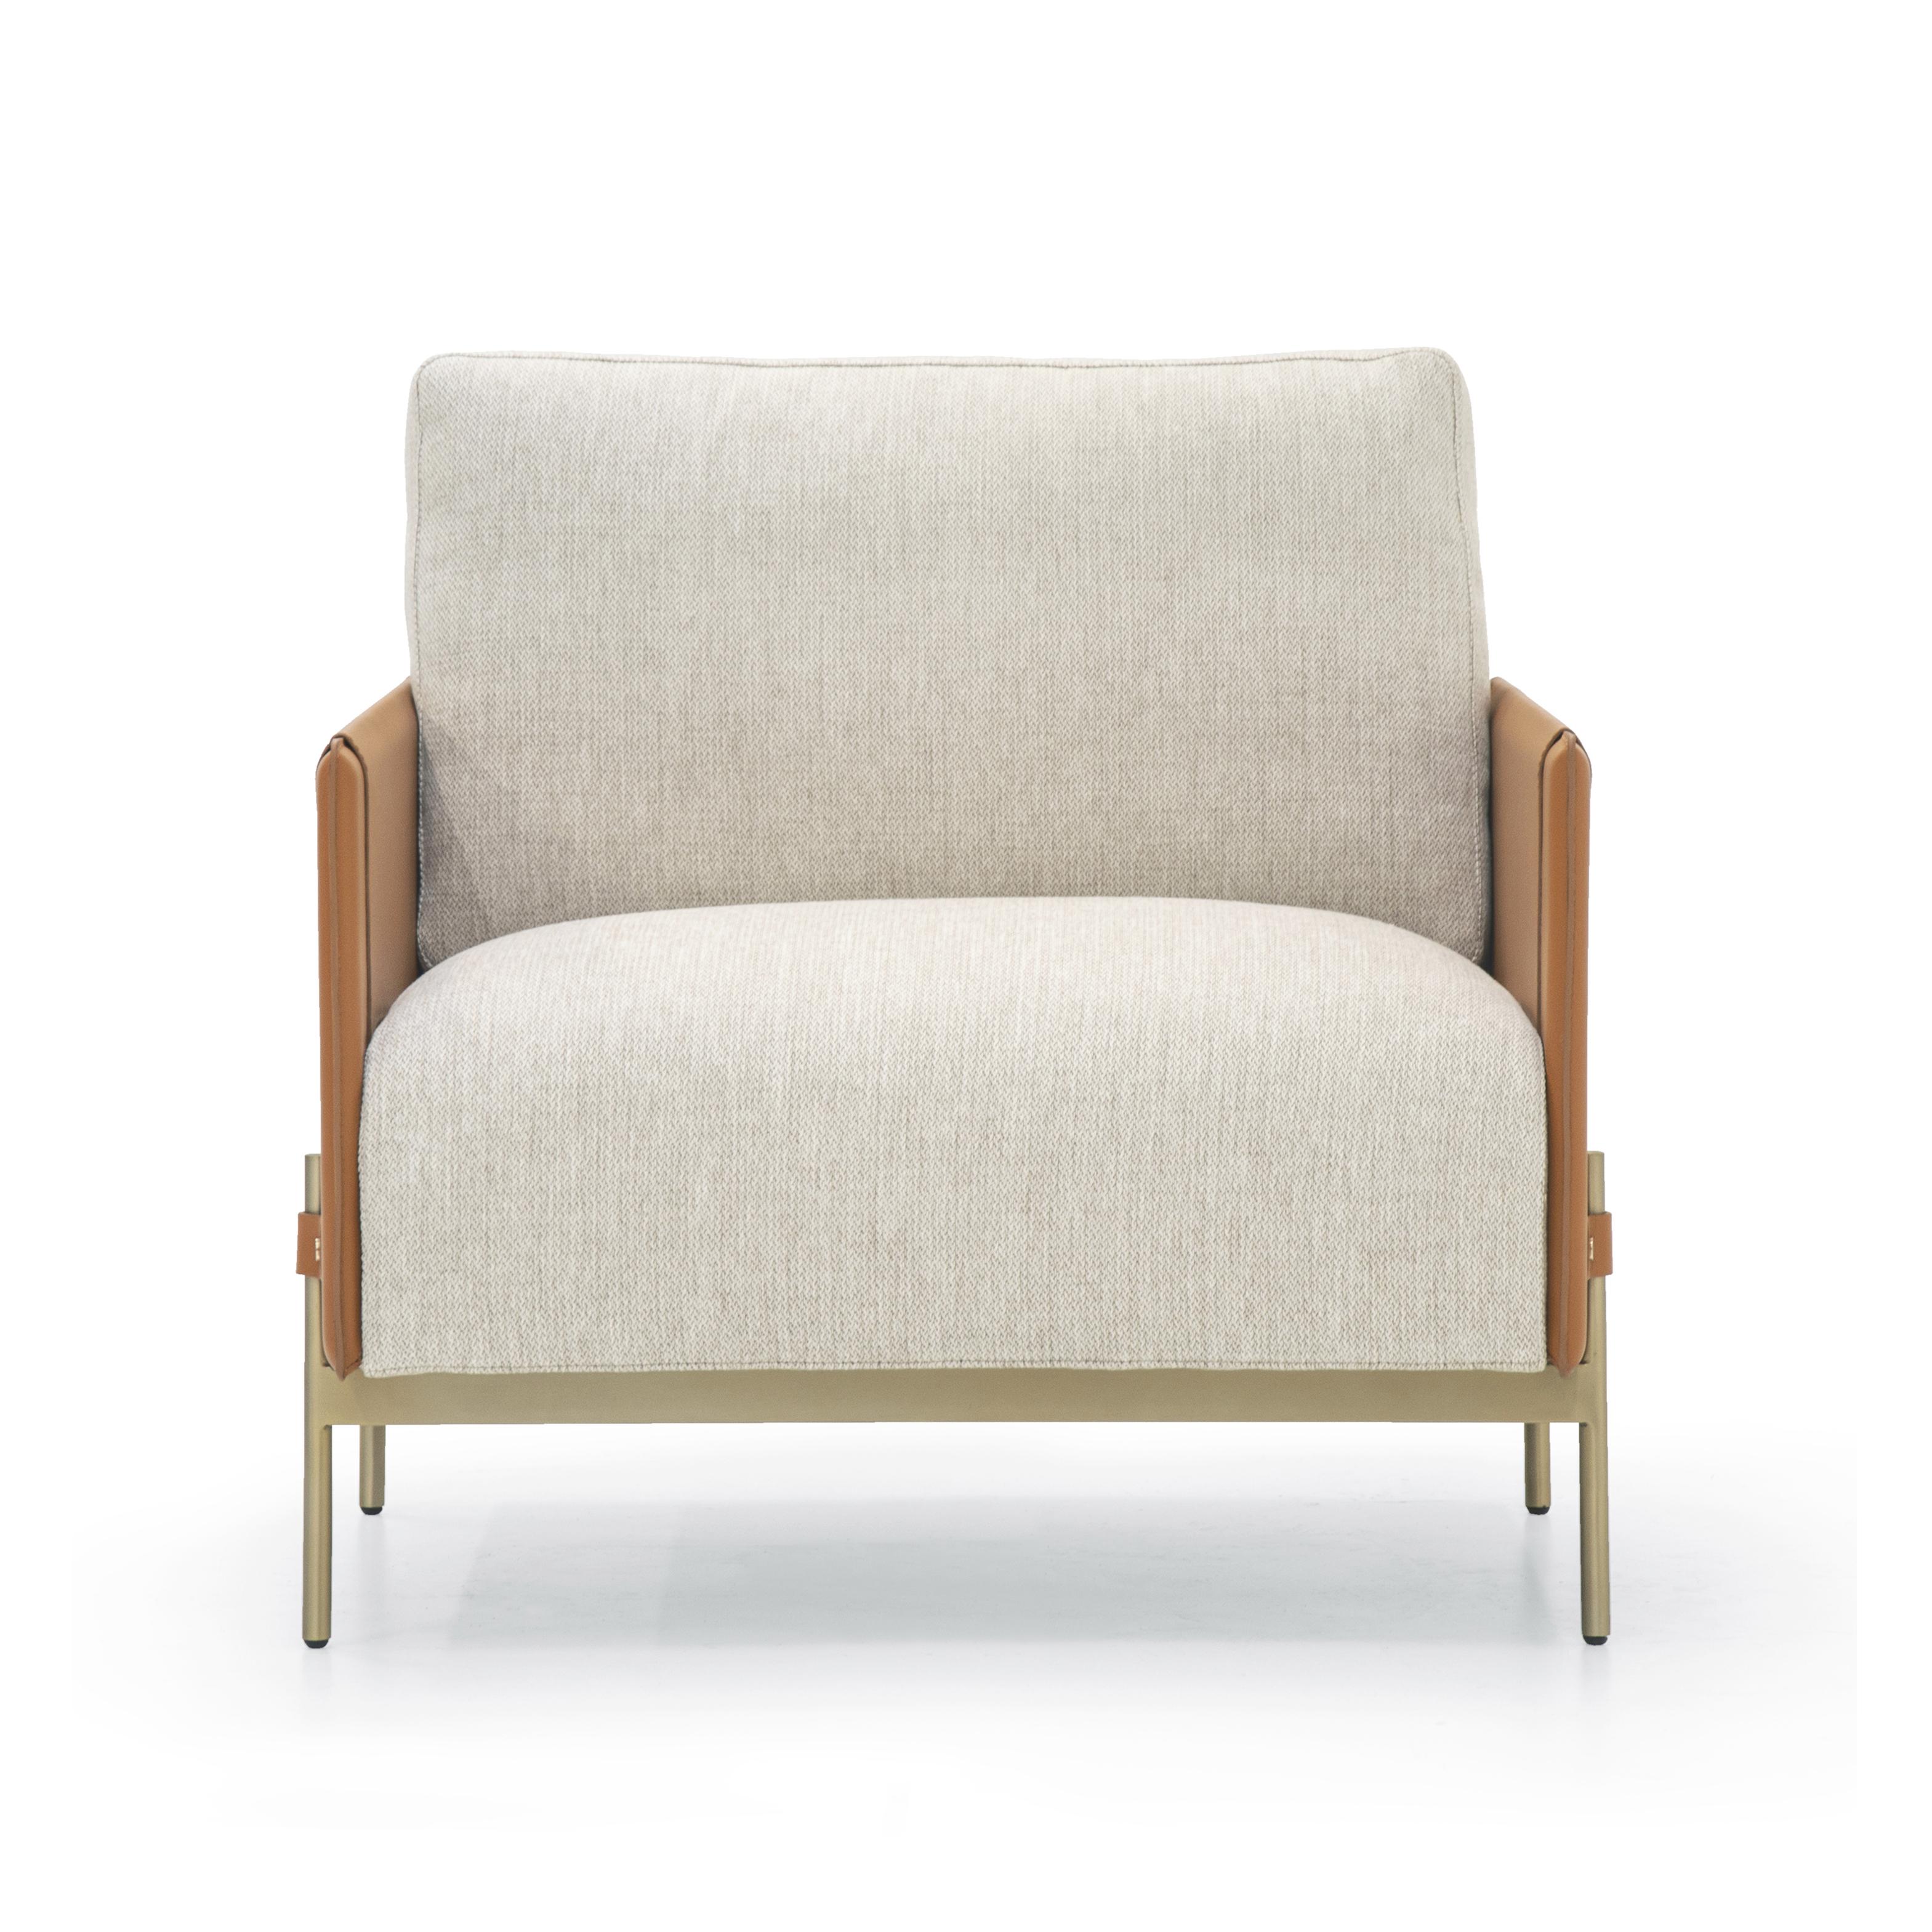 Other Contemporary Design, Iconic Armchair in Fabric  V215 For Sale